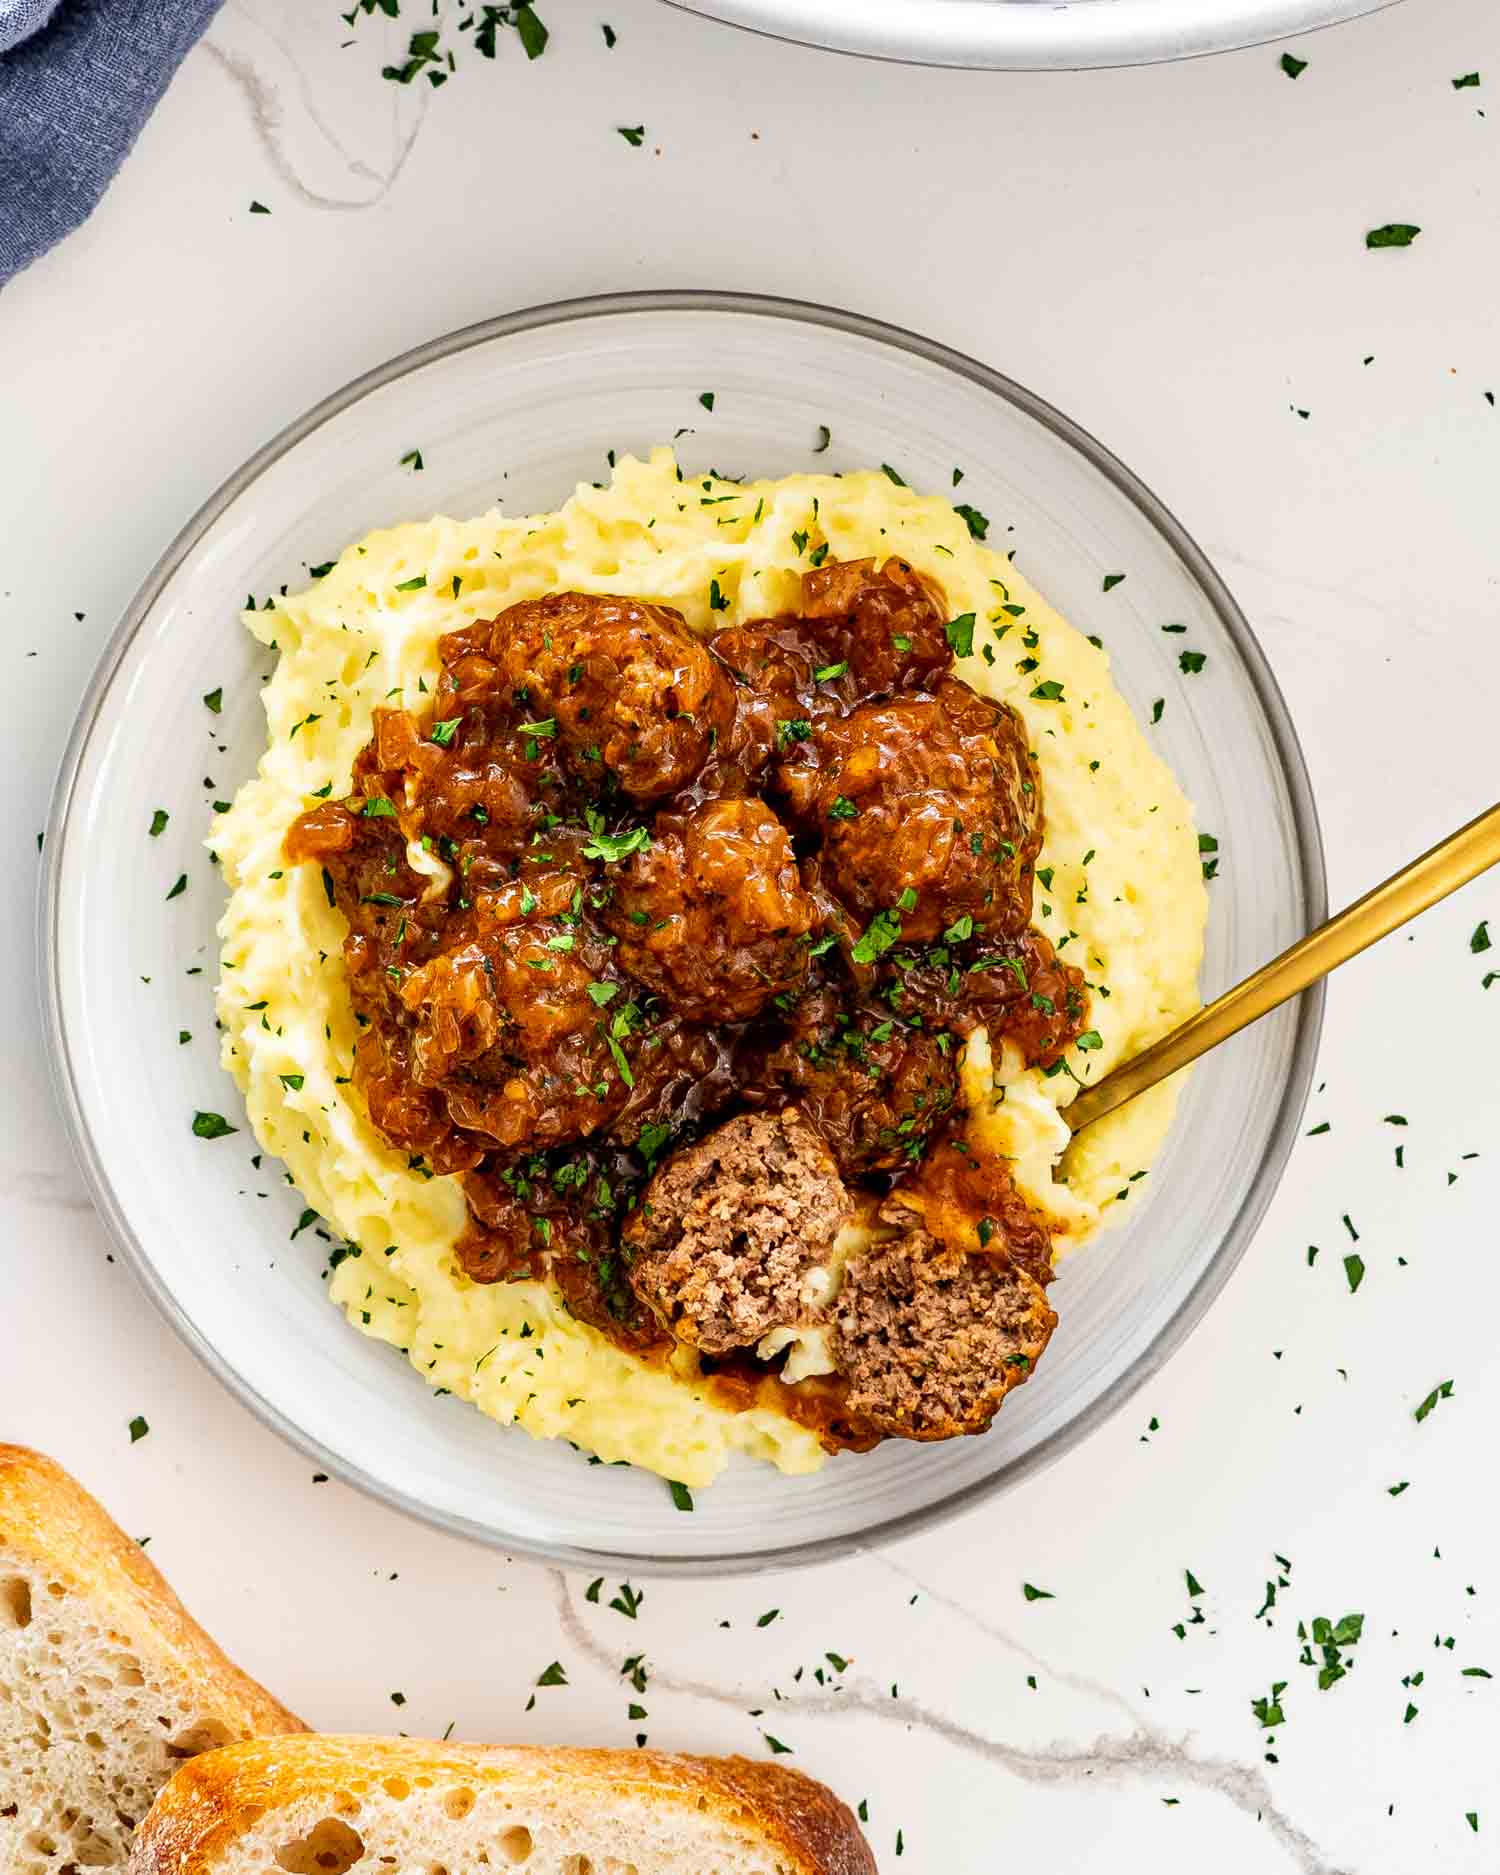 salisbury steak meatballs over a bed of mashed potatoes garnished with parsley.